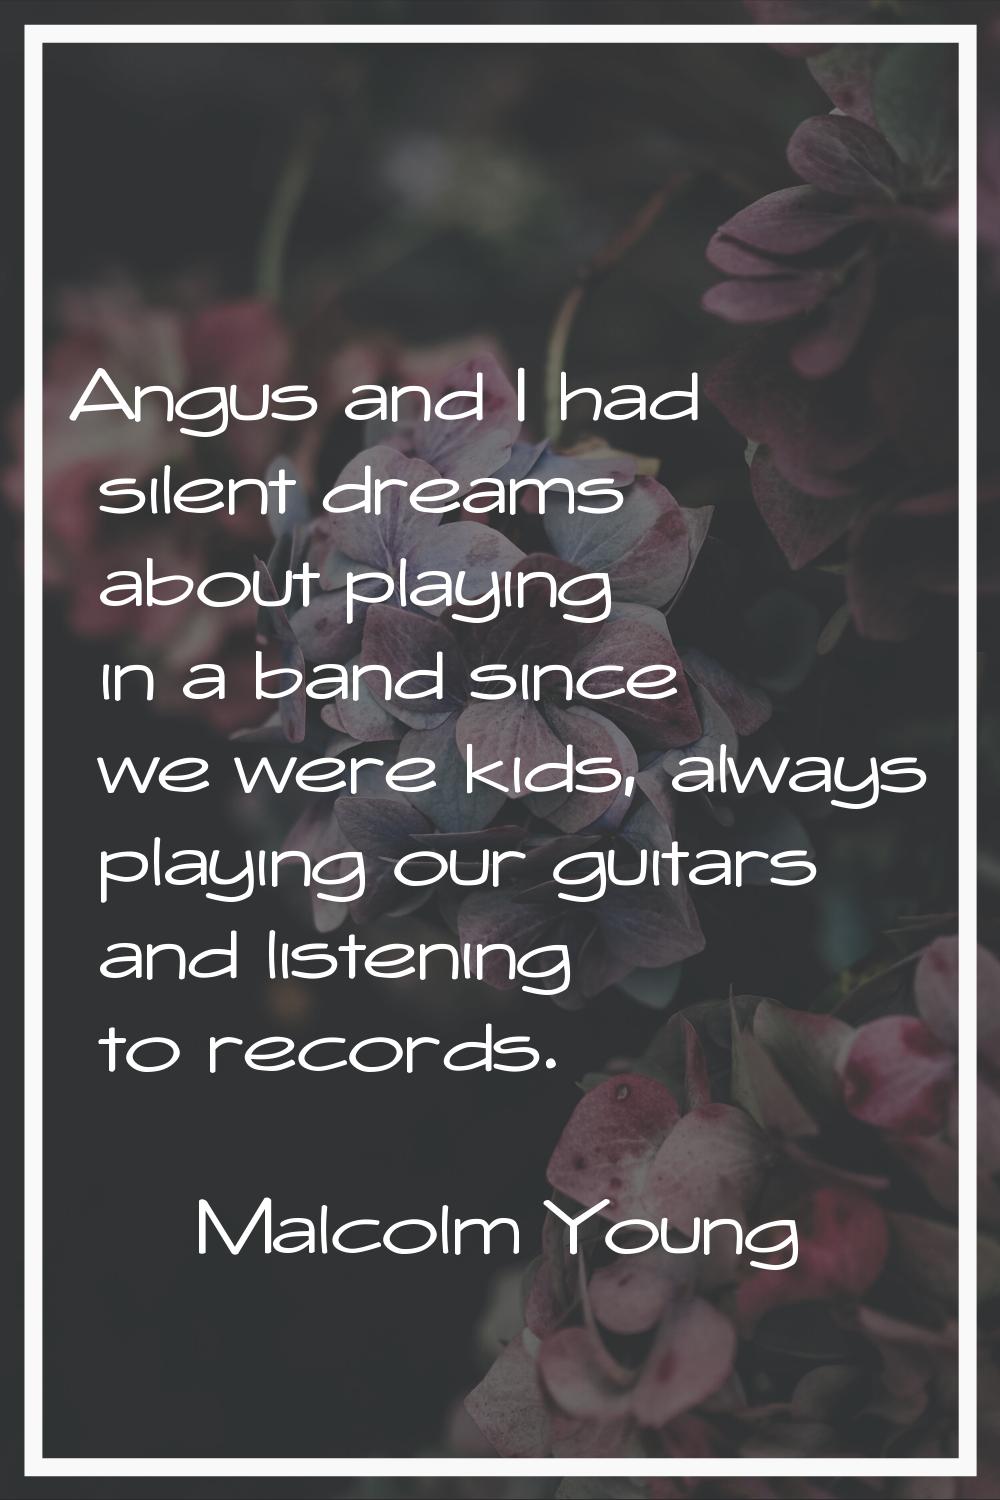 Angus and I had silent dreams about playing in a band since we were kids, always playing our guitar